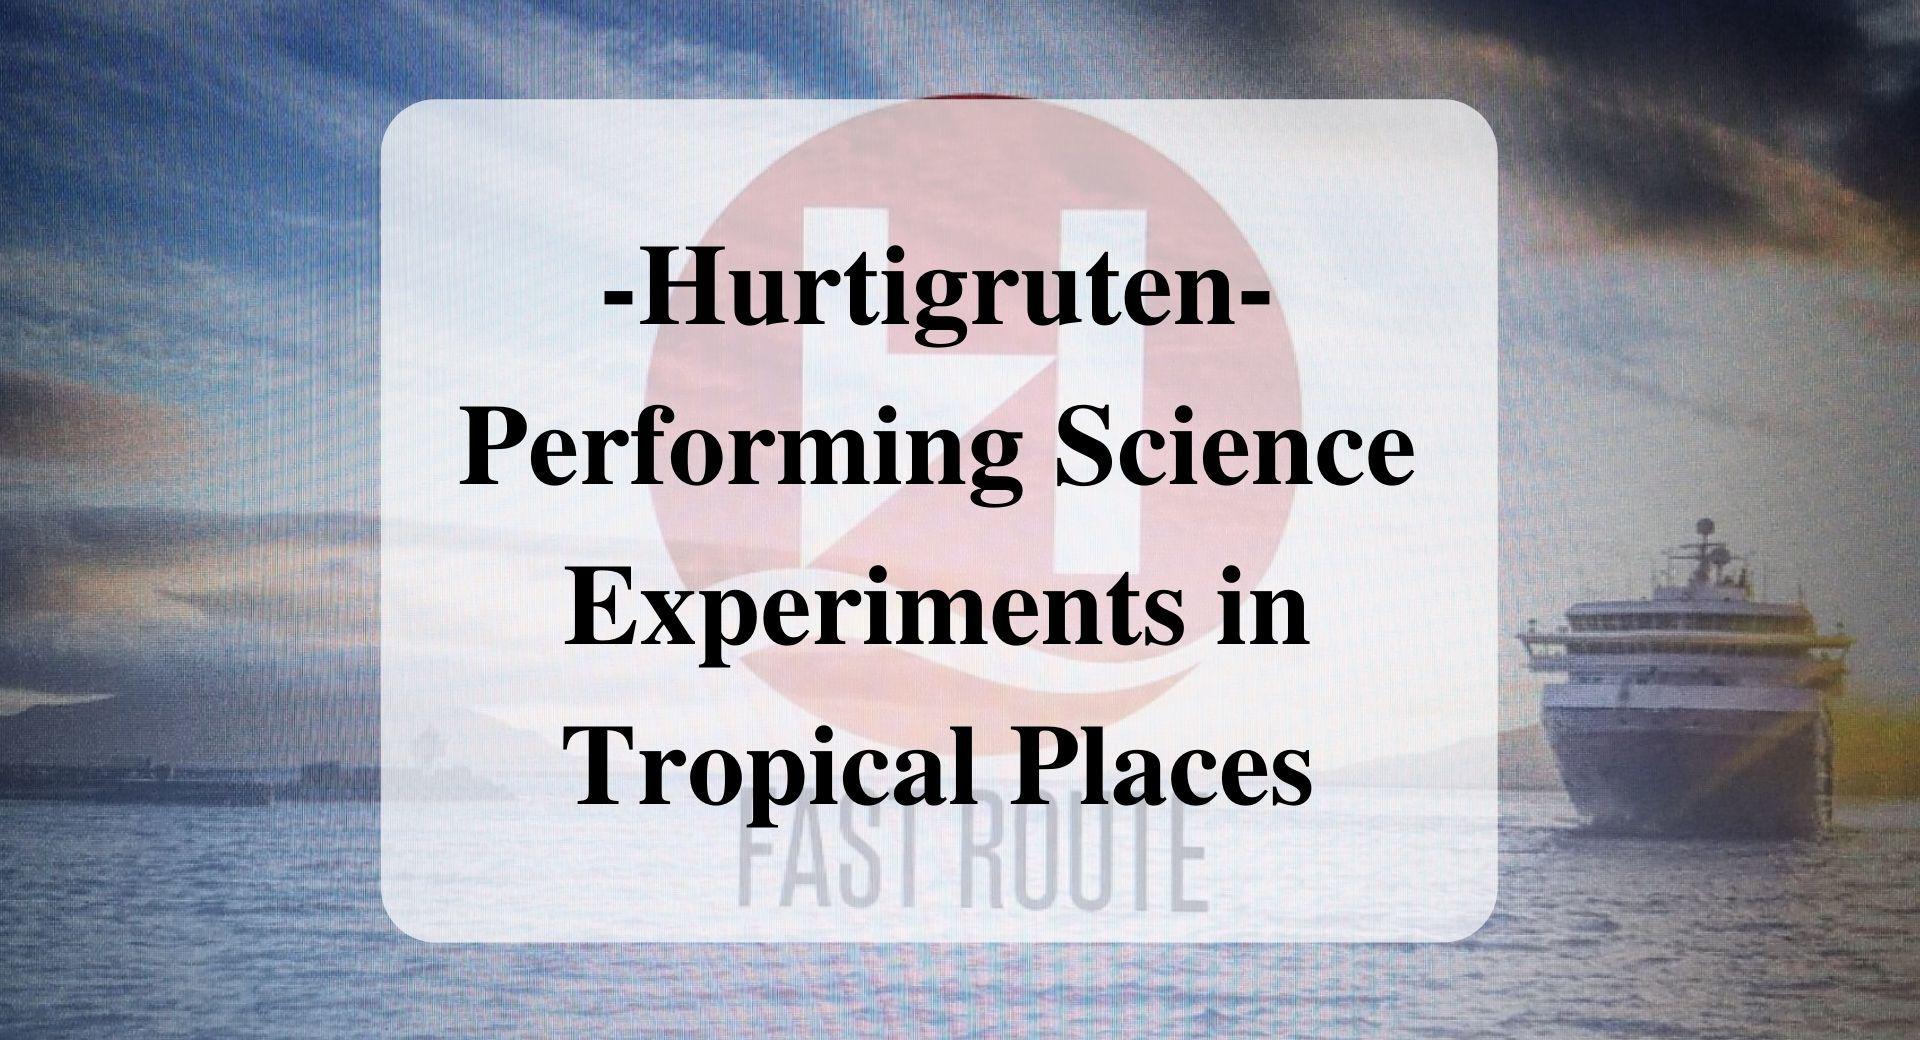 Main_Hurtigruten Performing Science Experiments in Tropical Places